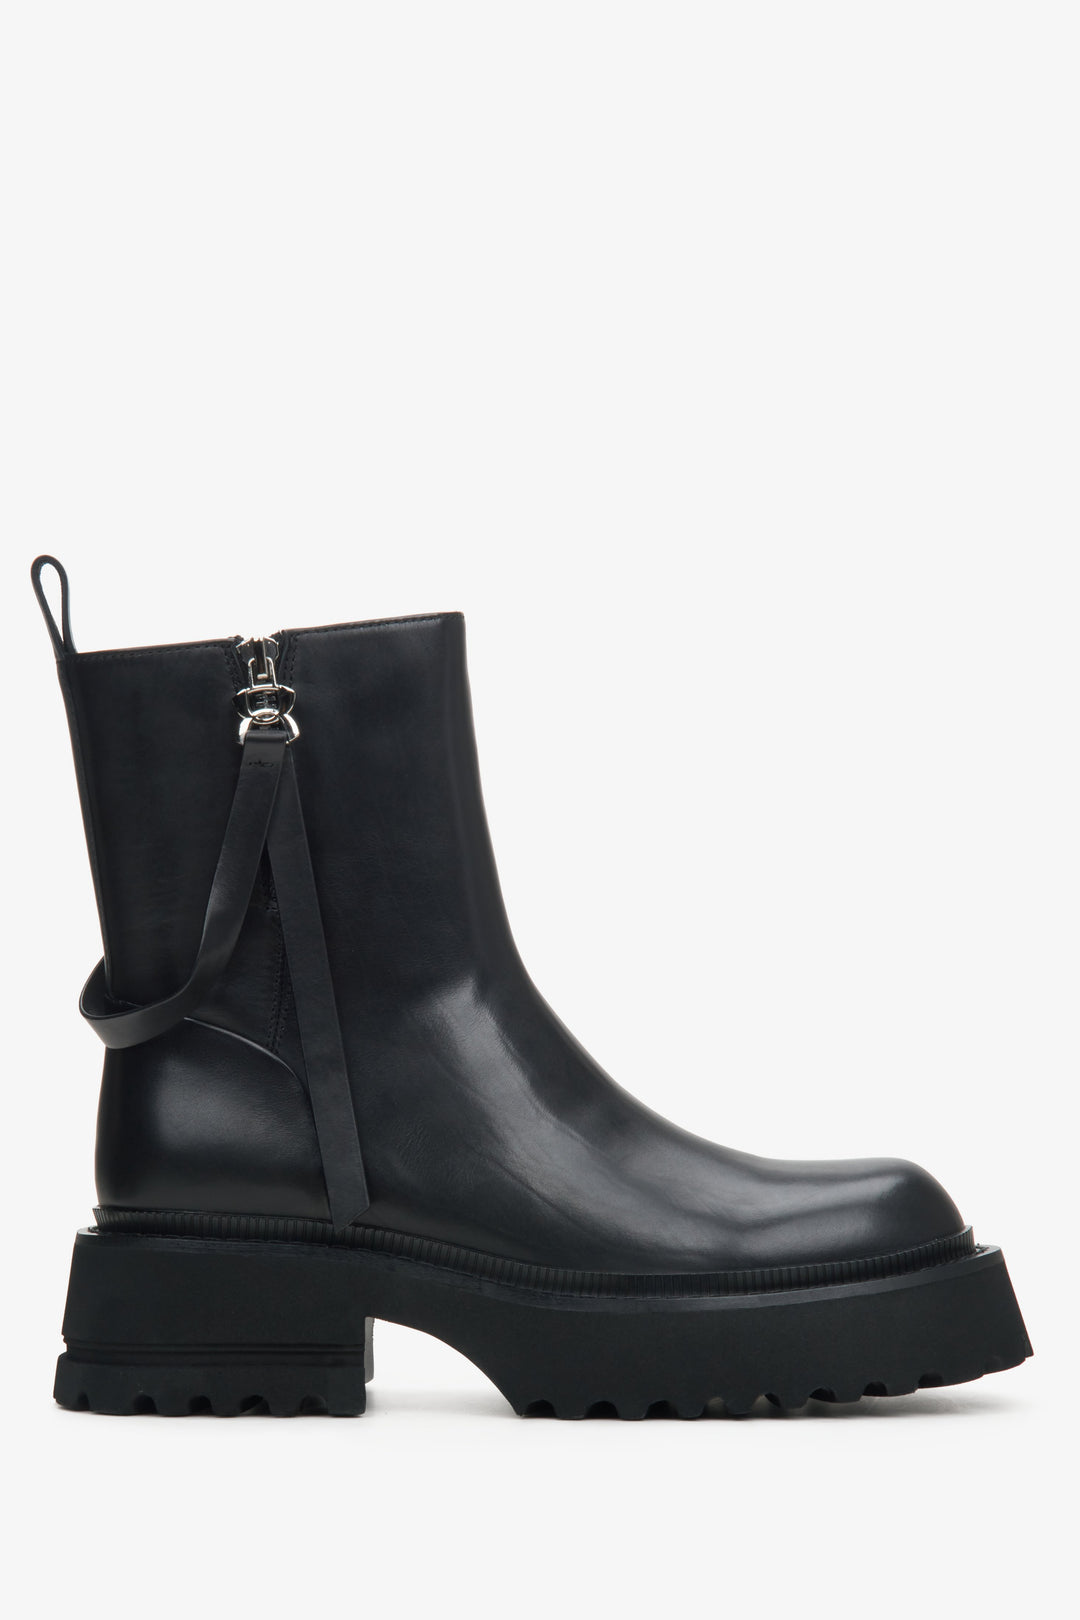 Women's Black Boots made of Genuine Leather with Decorative Strap Estro ER00114330.